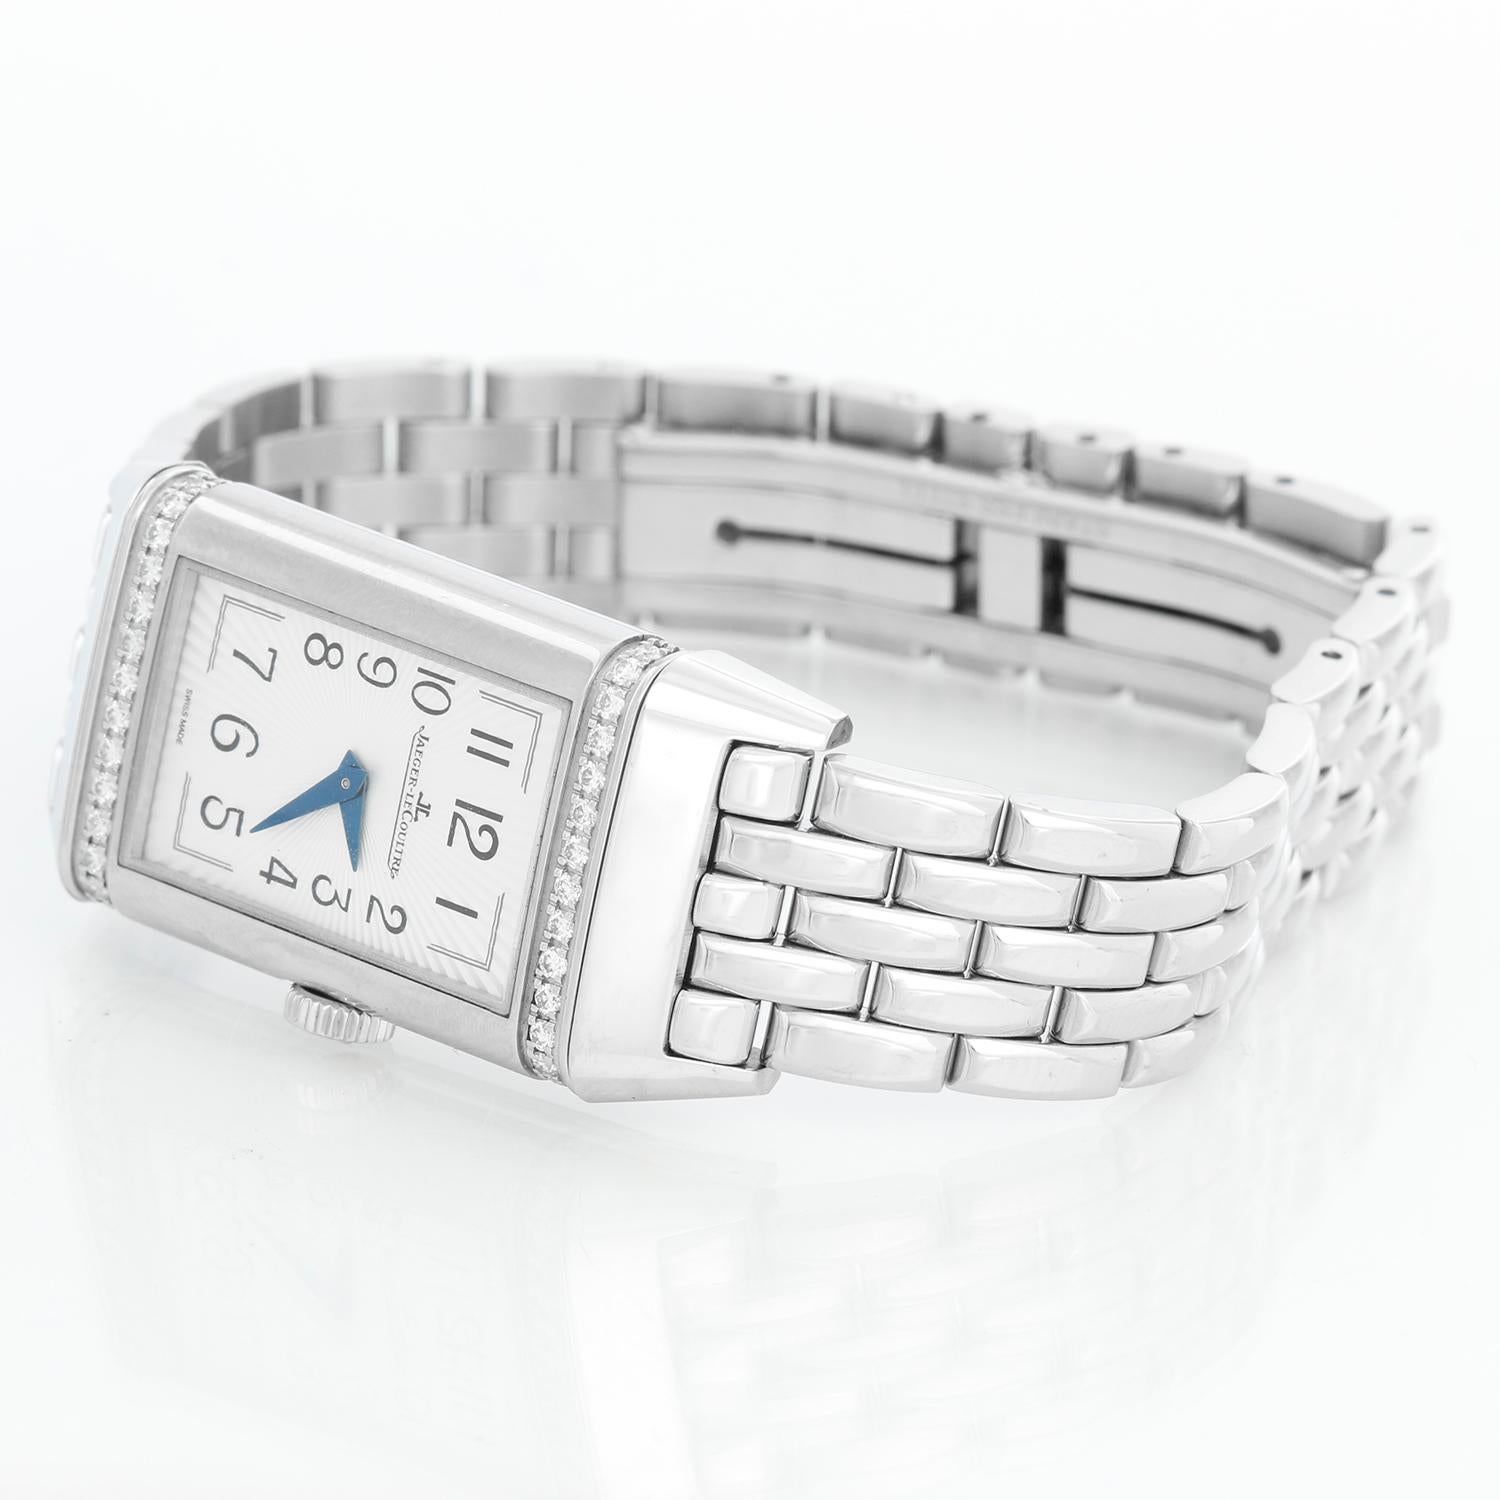 Jaeger LeCoultre Reverso One Duetto Ladies Watch Ref. Q3348120 - Manual winding . Stainless steel  with diamonds ( 20 x 40 mm ). Silver Gray with Arabic numerals; Blue dial with stars. Jaeger Le-Coultre Stainless steel bracelet. Pre-owned with